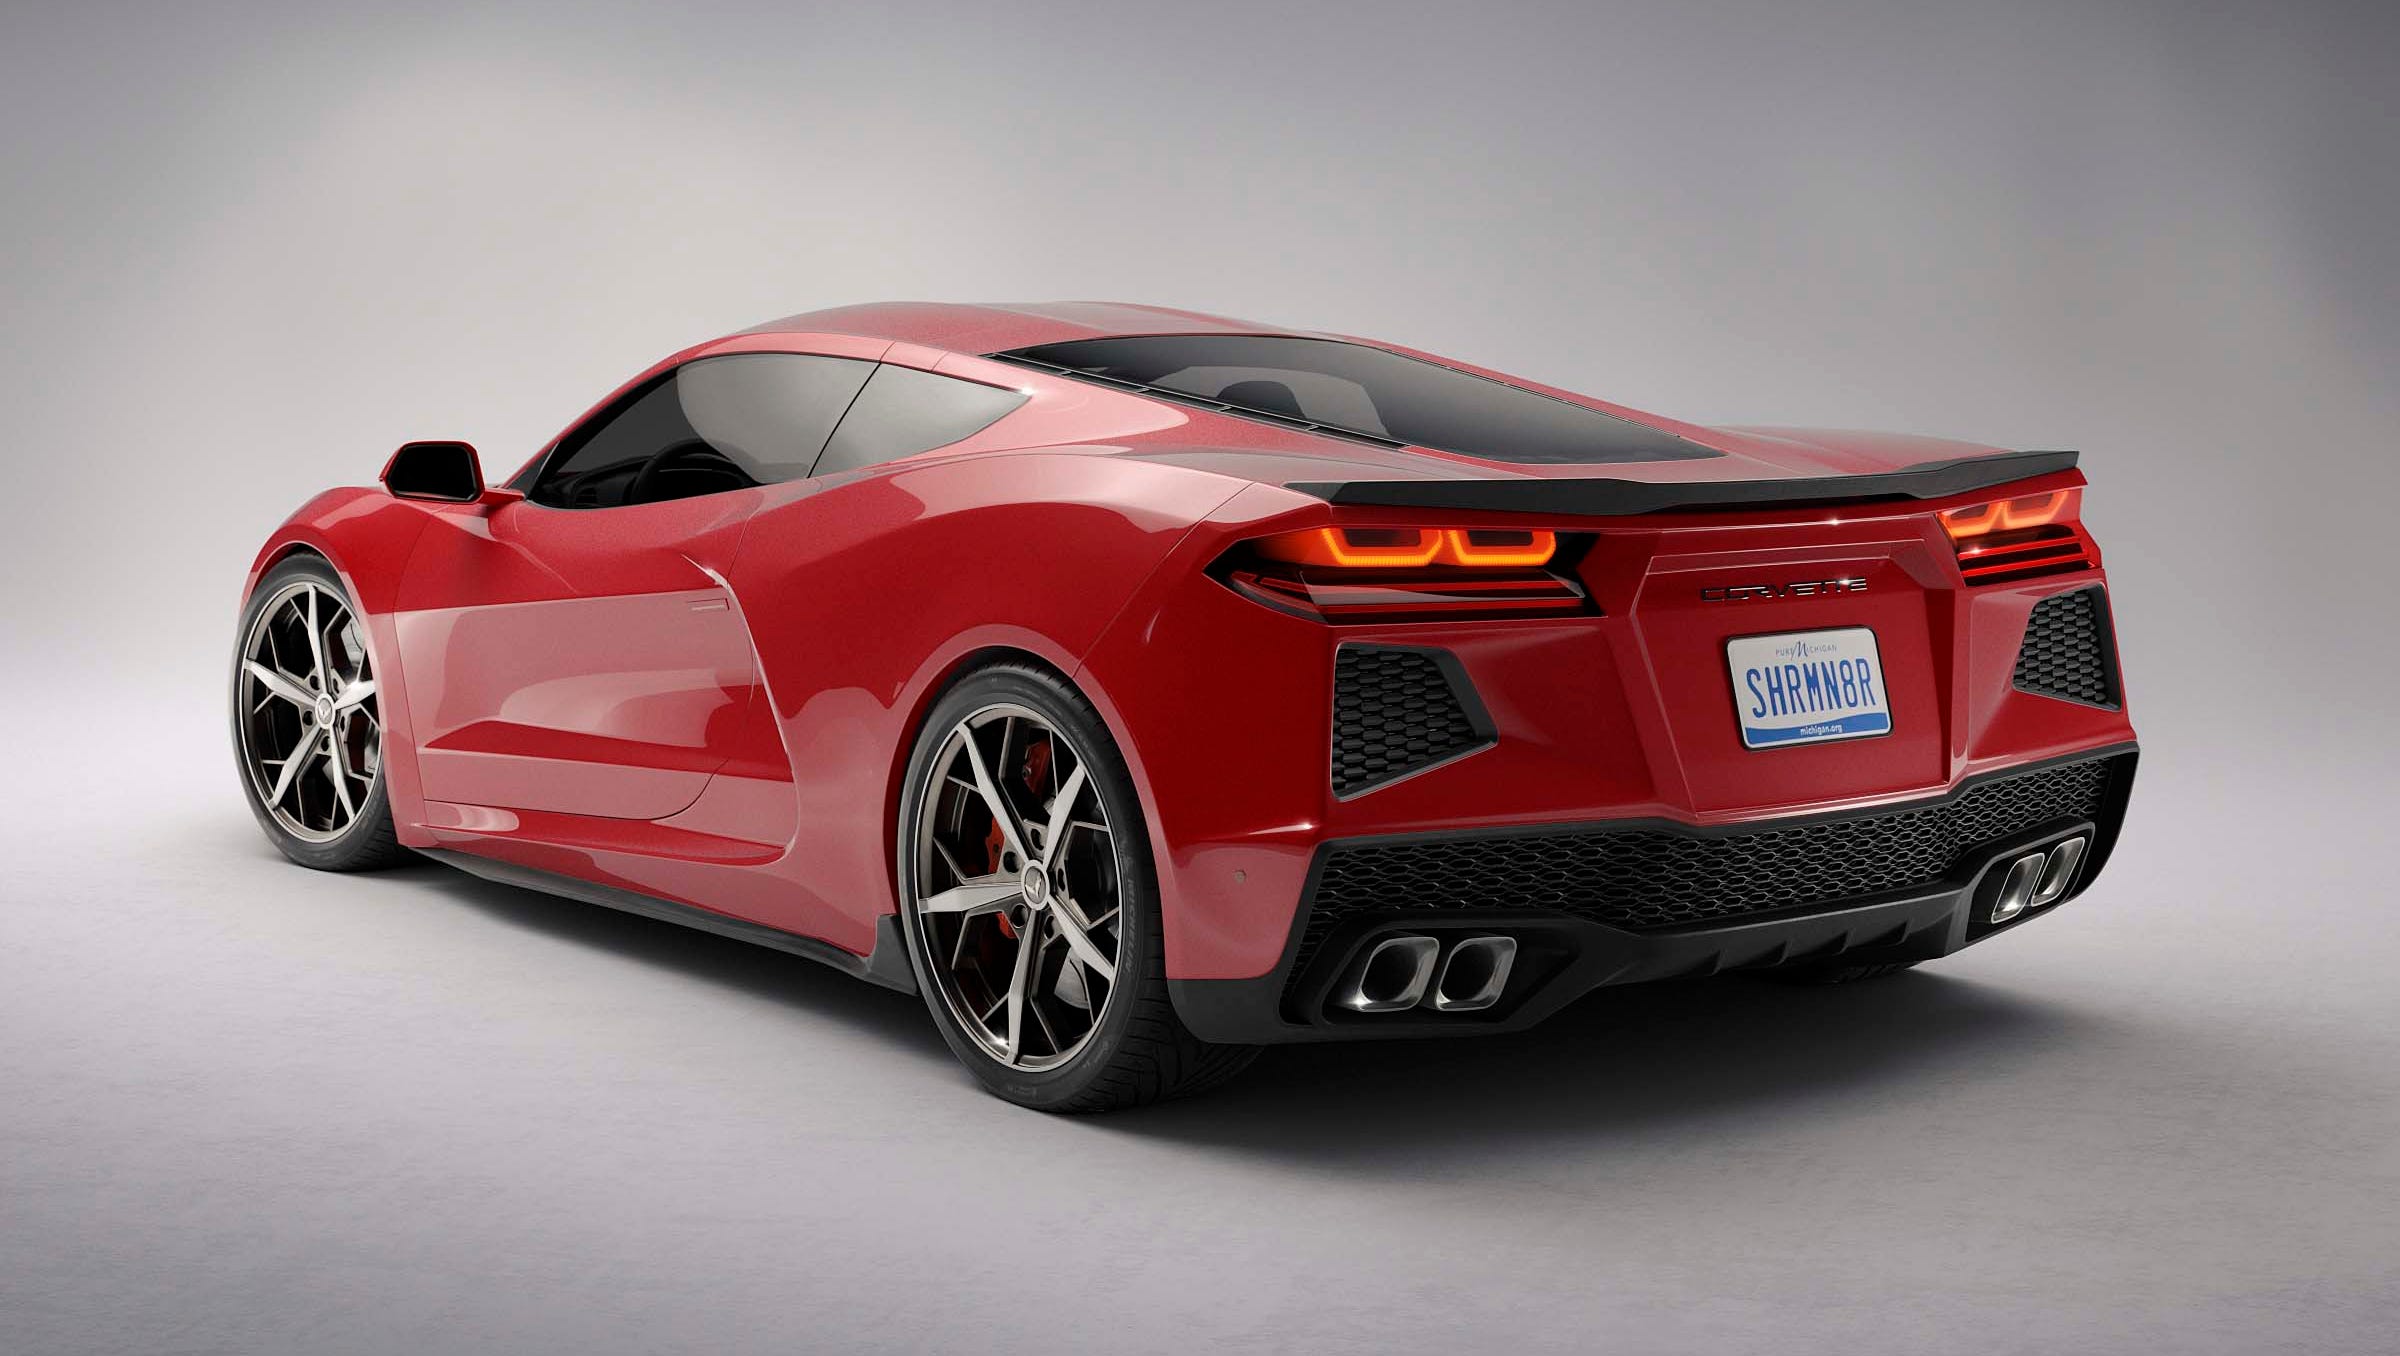 The coming, mid-engine Corvette C8 - here shown in a Car and Driver artist's rendering - would feature a push-rod V-8 engine with an aluminum frame.